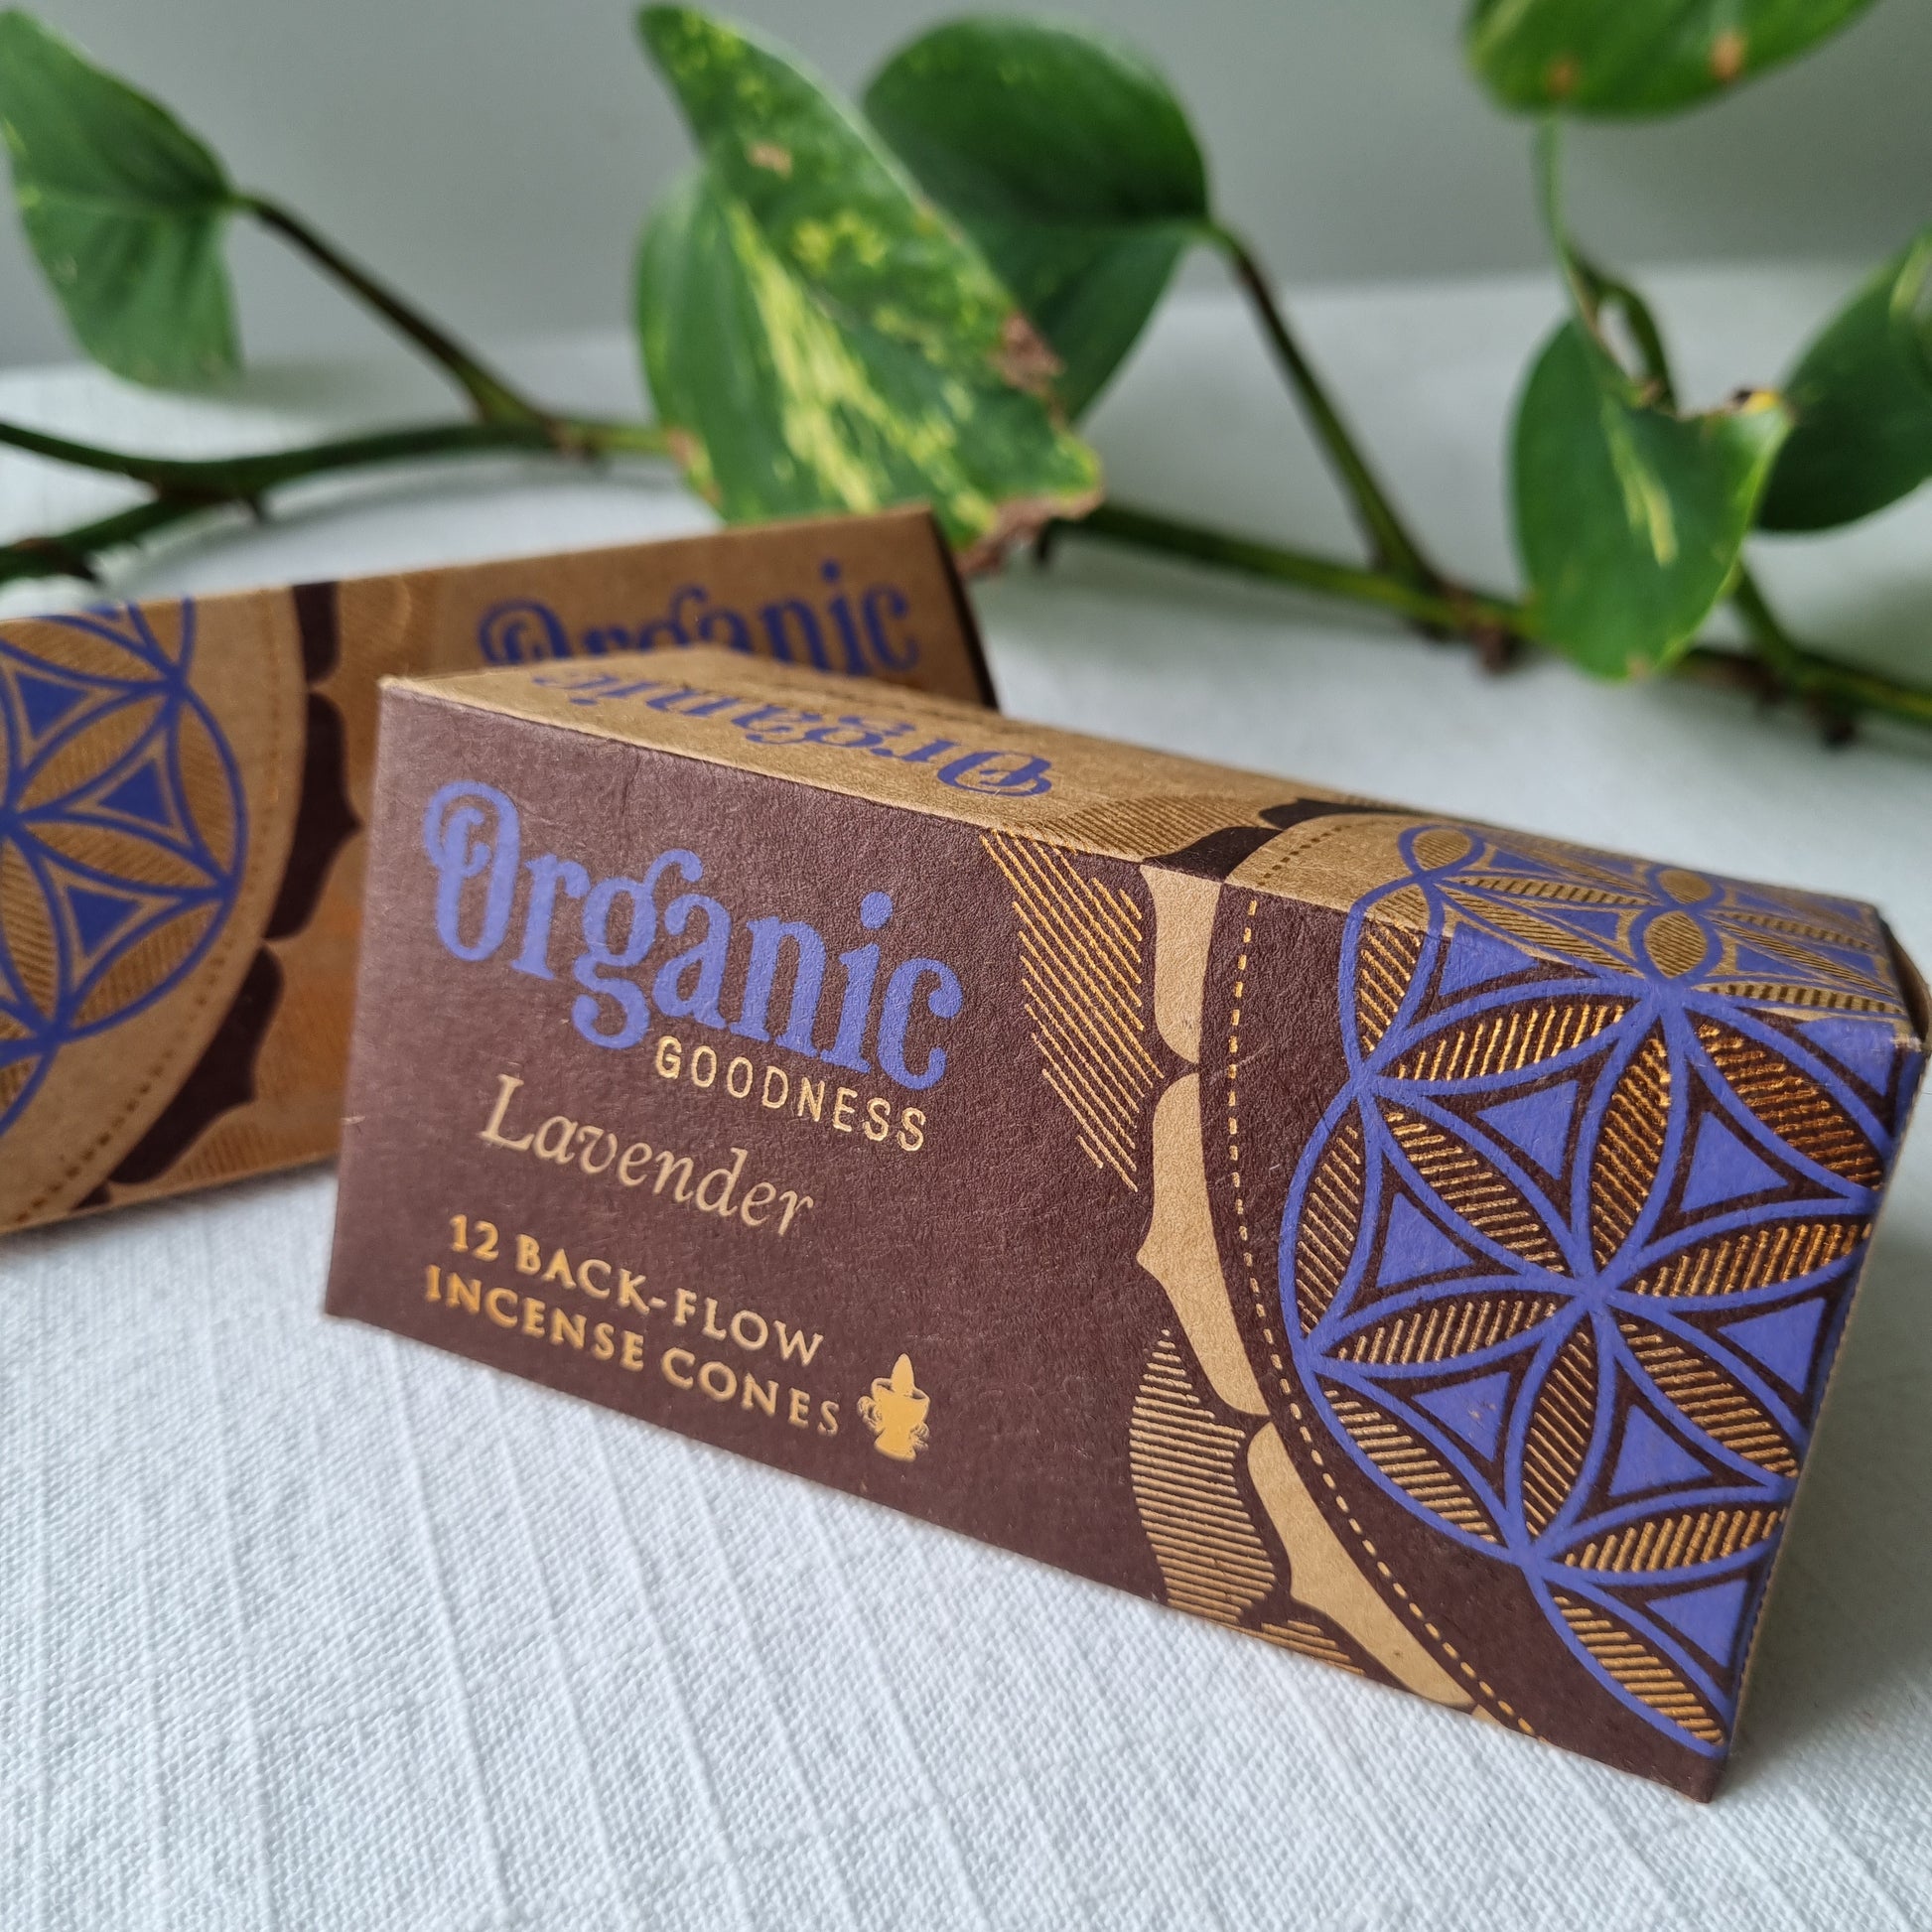 Lavender Back-Flow Incense Cones - Organic Goodness Masala Incense - Sparrow and Fox